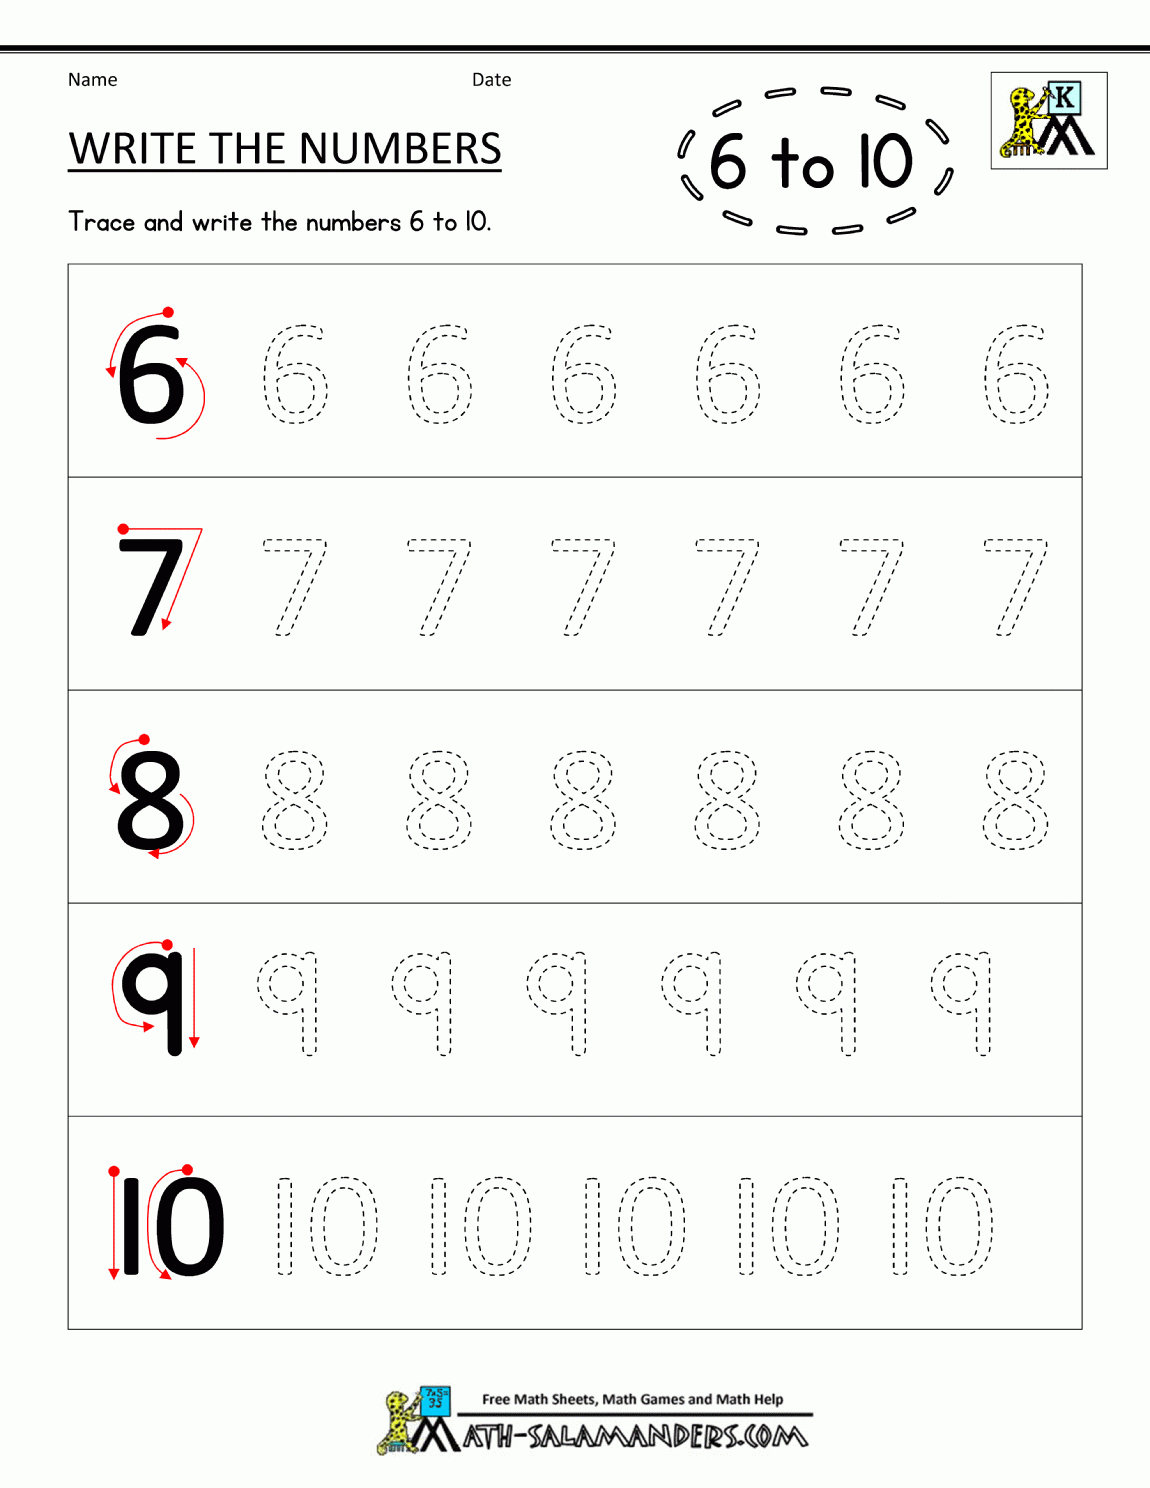 Writing number worksheets write the numbers 6 to 10 gif 1 150 1 488 Pixel Writing Numbers Number Writing Practice Kindergarten Writing Practice Kindergarten